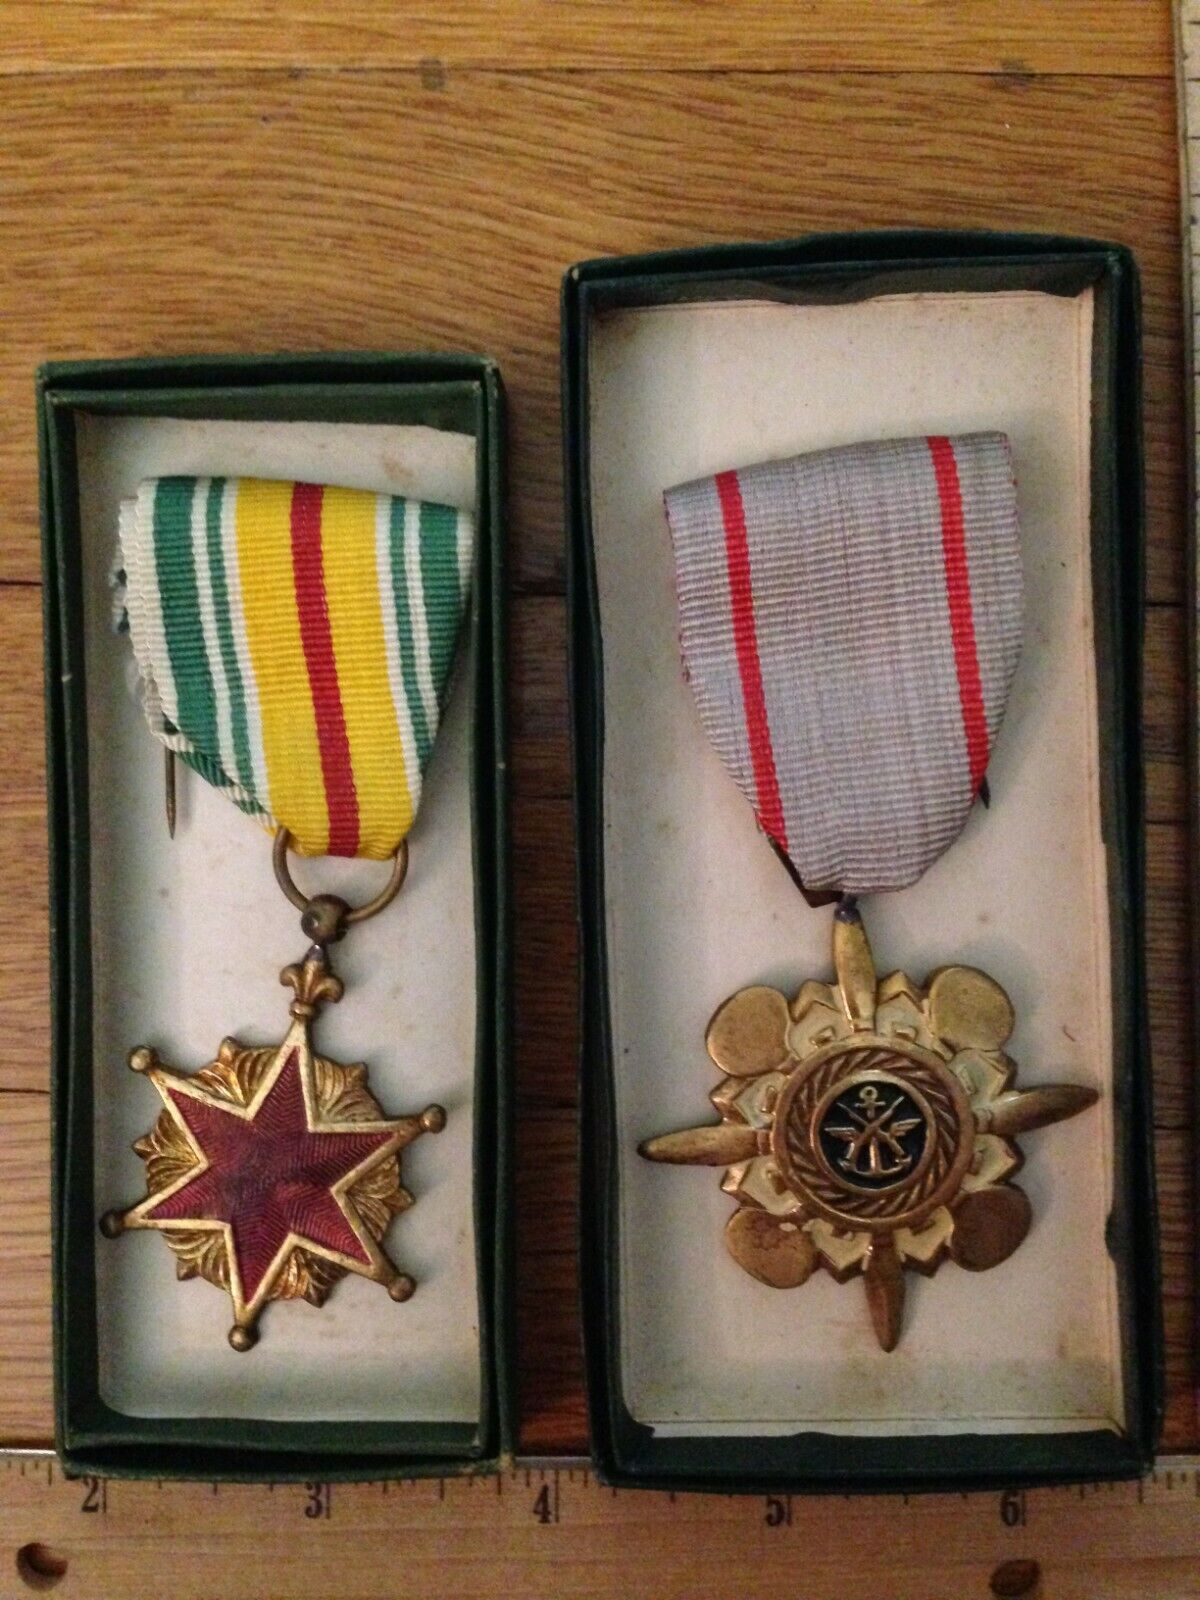 2 MEDALS - Wound Medal & Technical Service, Republic of Vietnam - Pre-1975